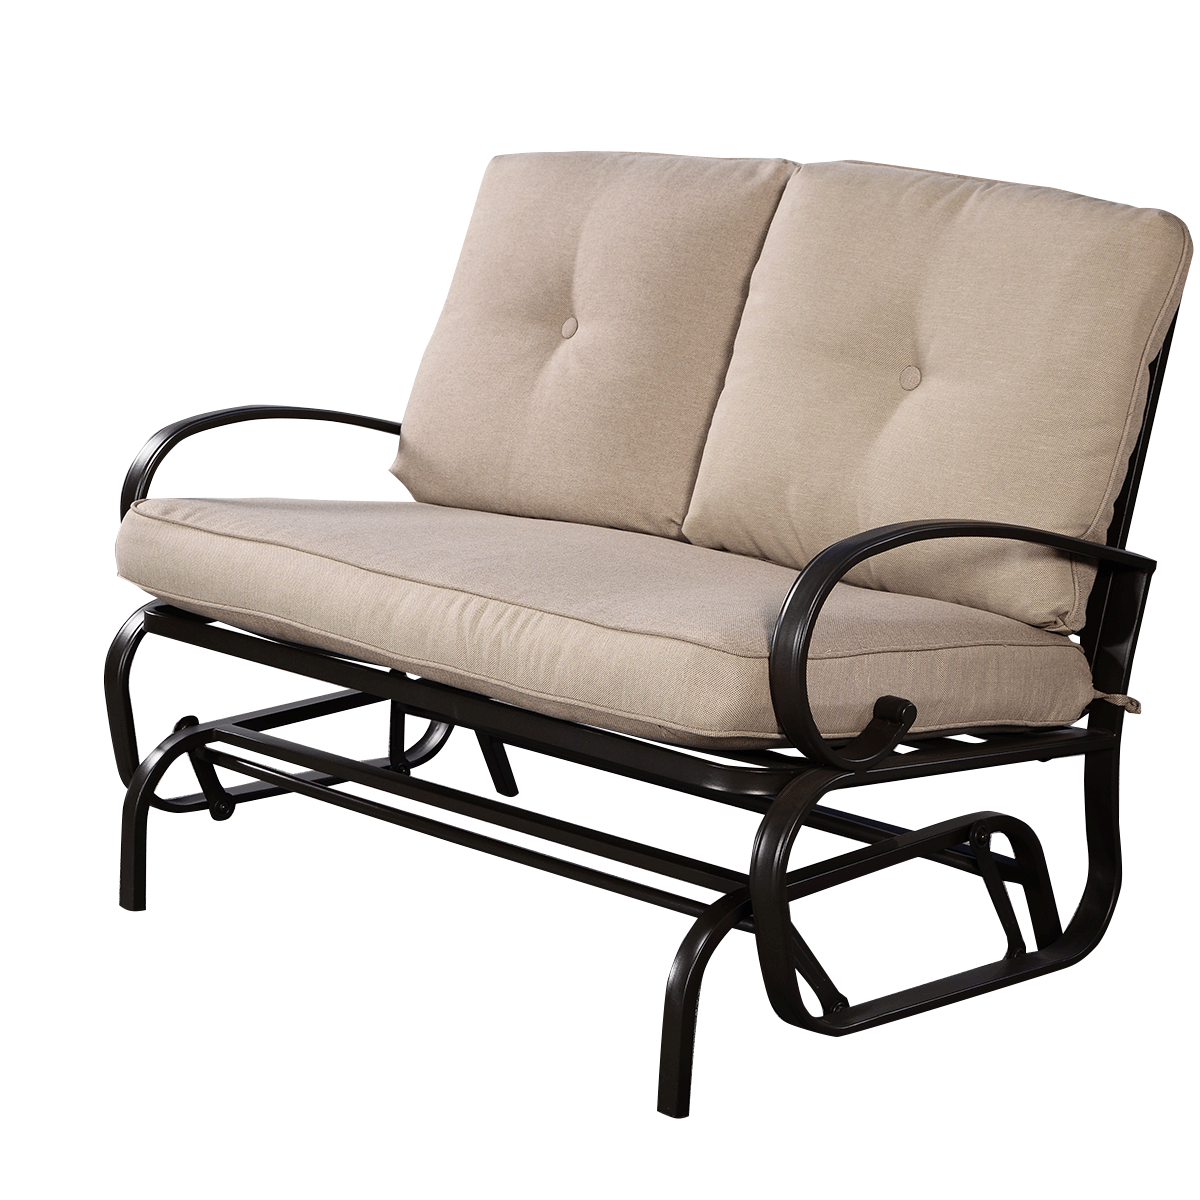 outdoor loveseats costway glider outdoor patio rocking bench loveseat cushioned seat steel  frame furniture OLTBMPA